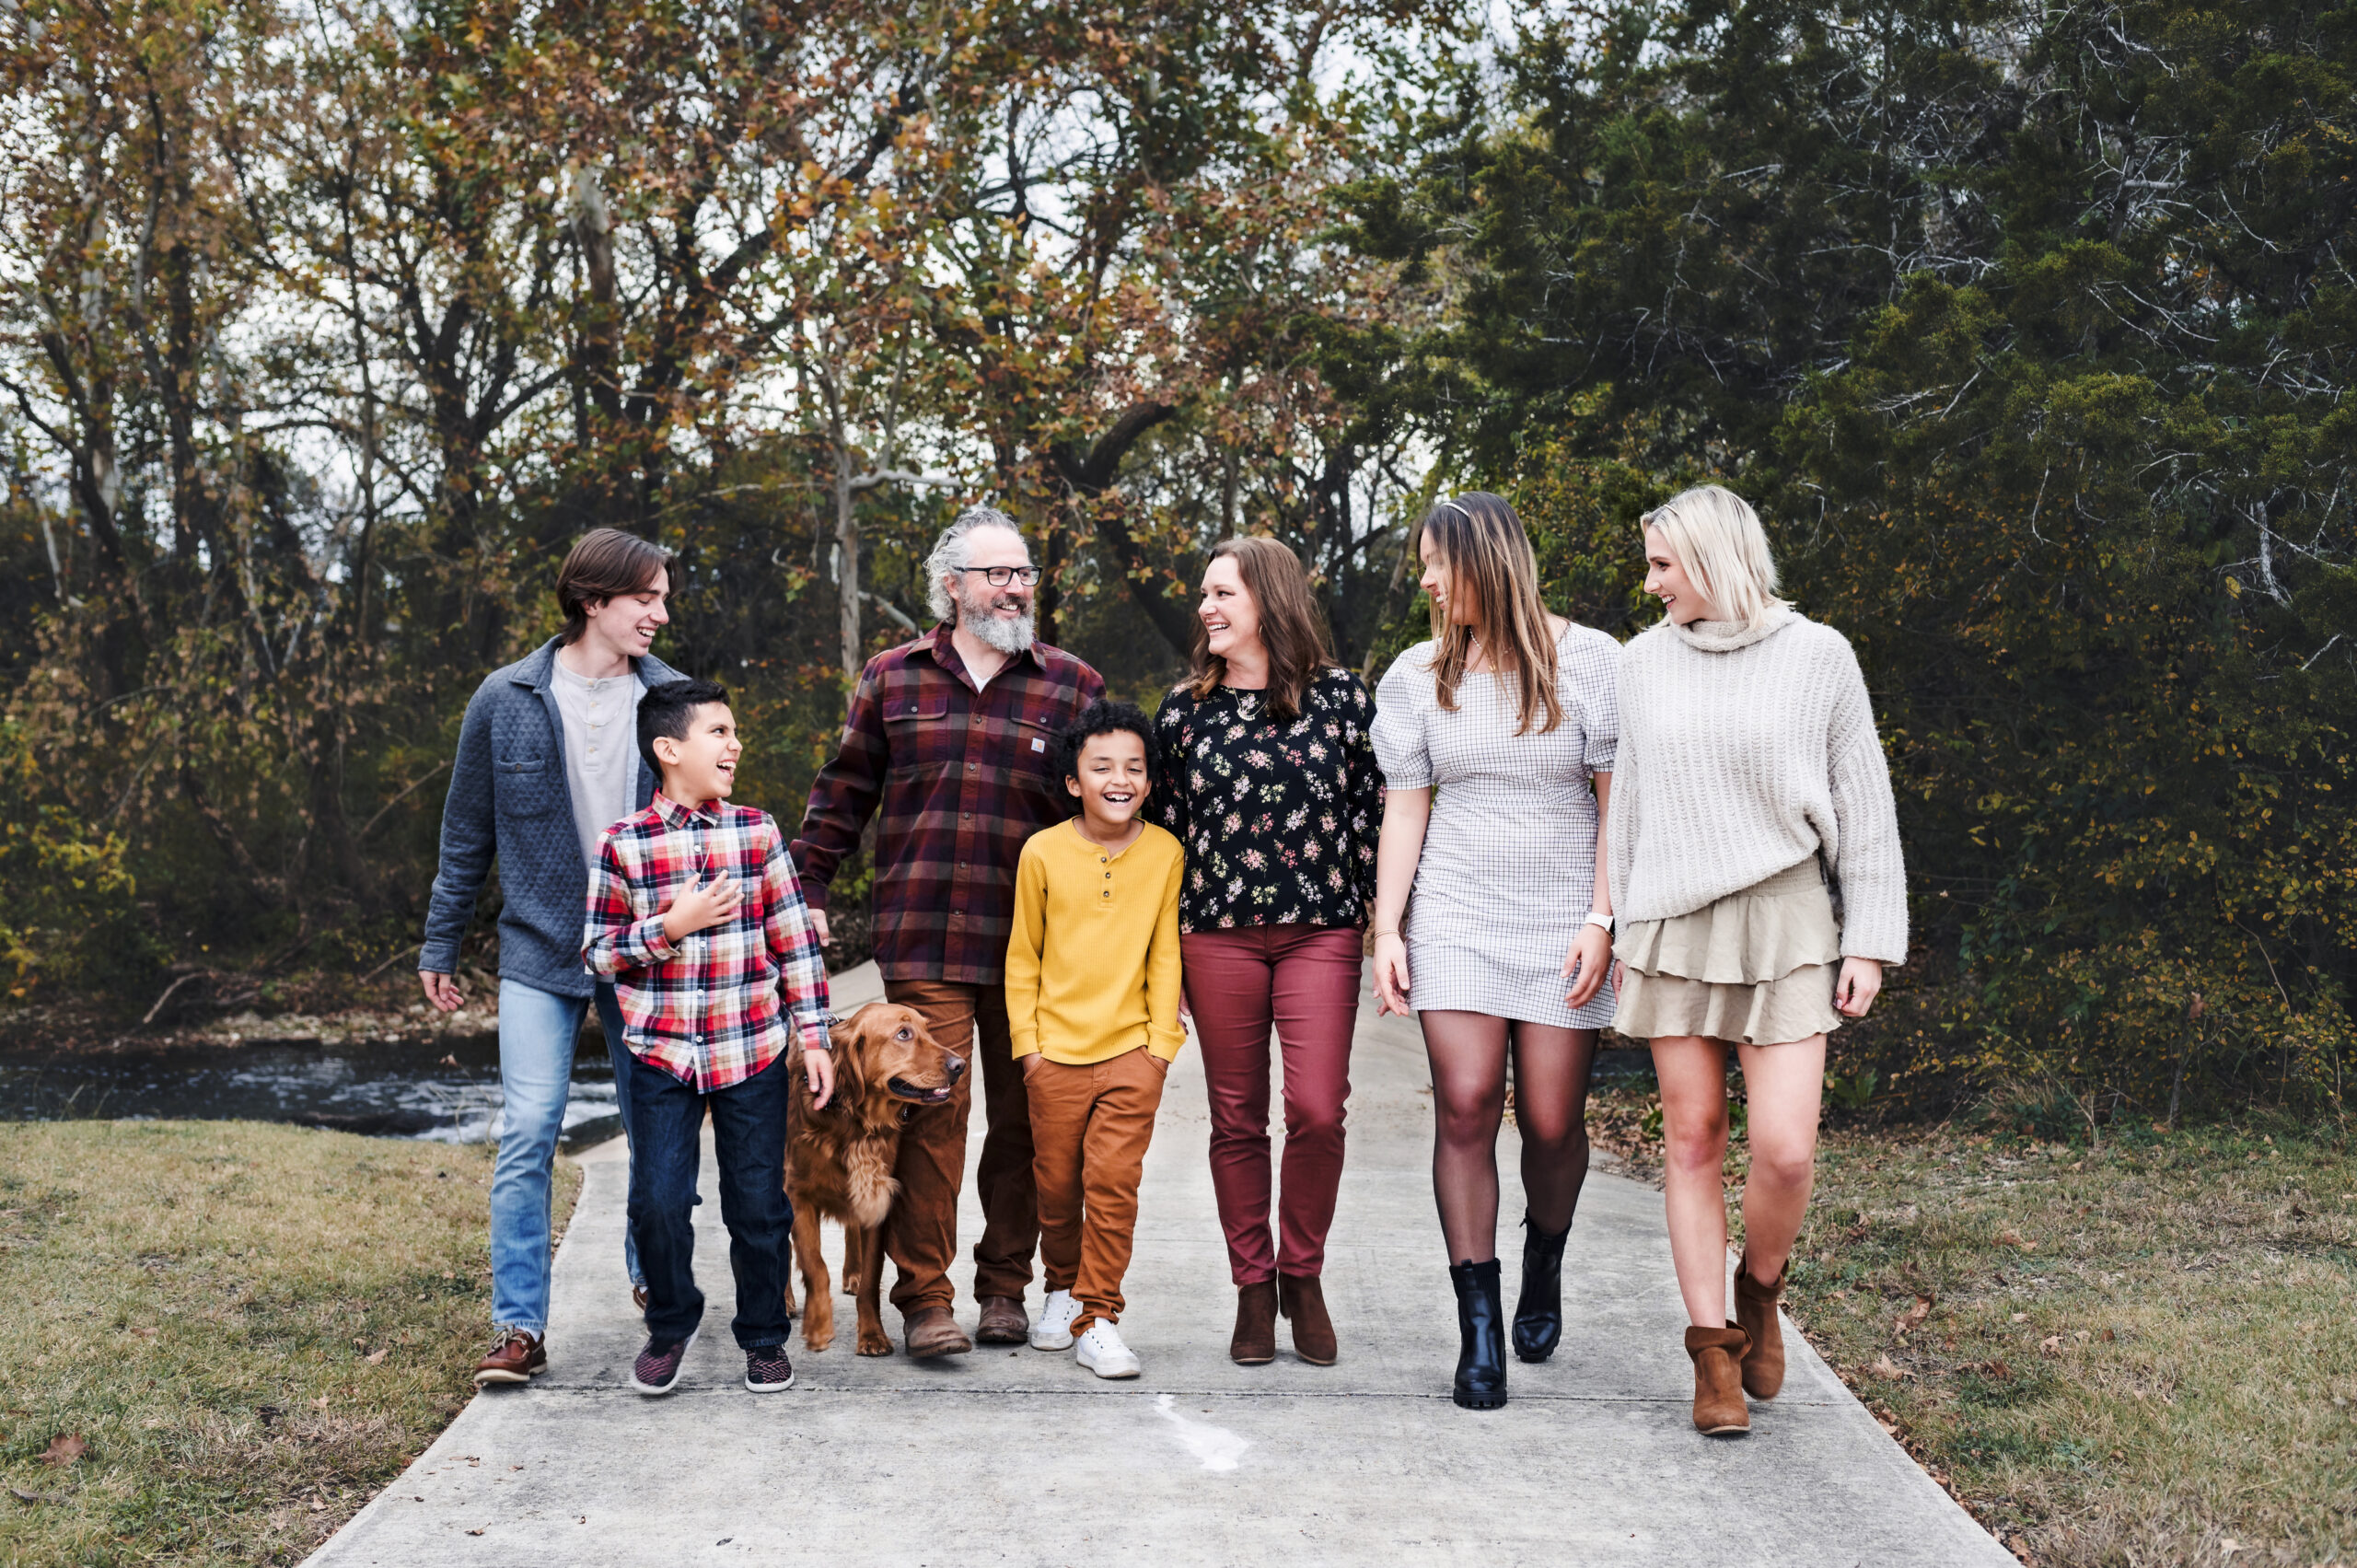 Super fun family of five and their playful dog during a joy-filled family photo session